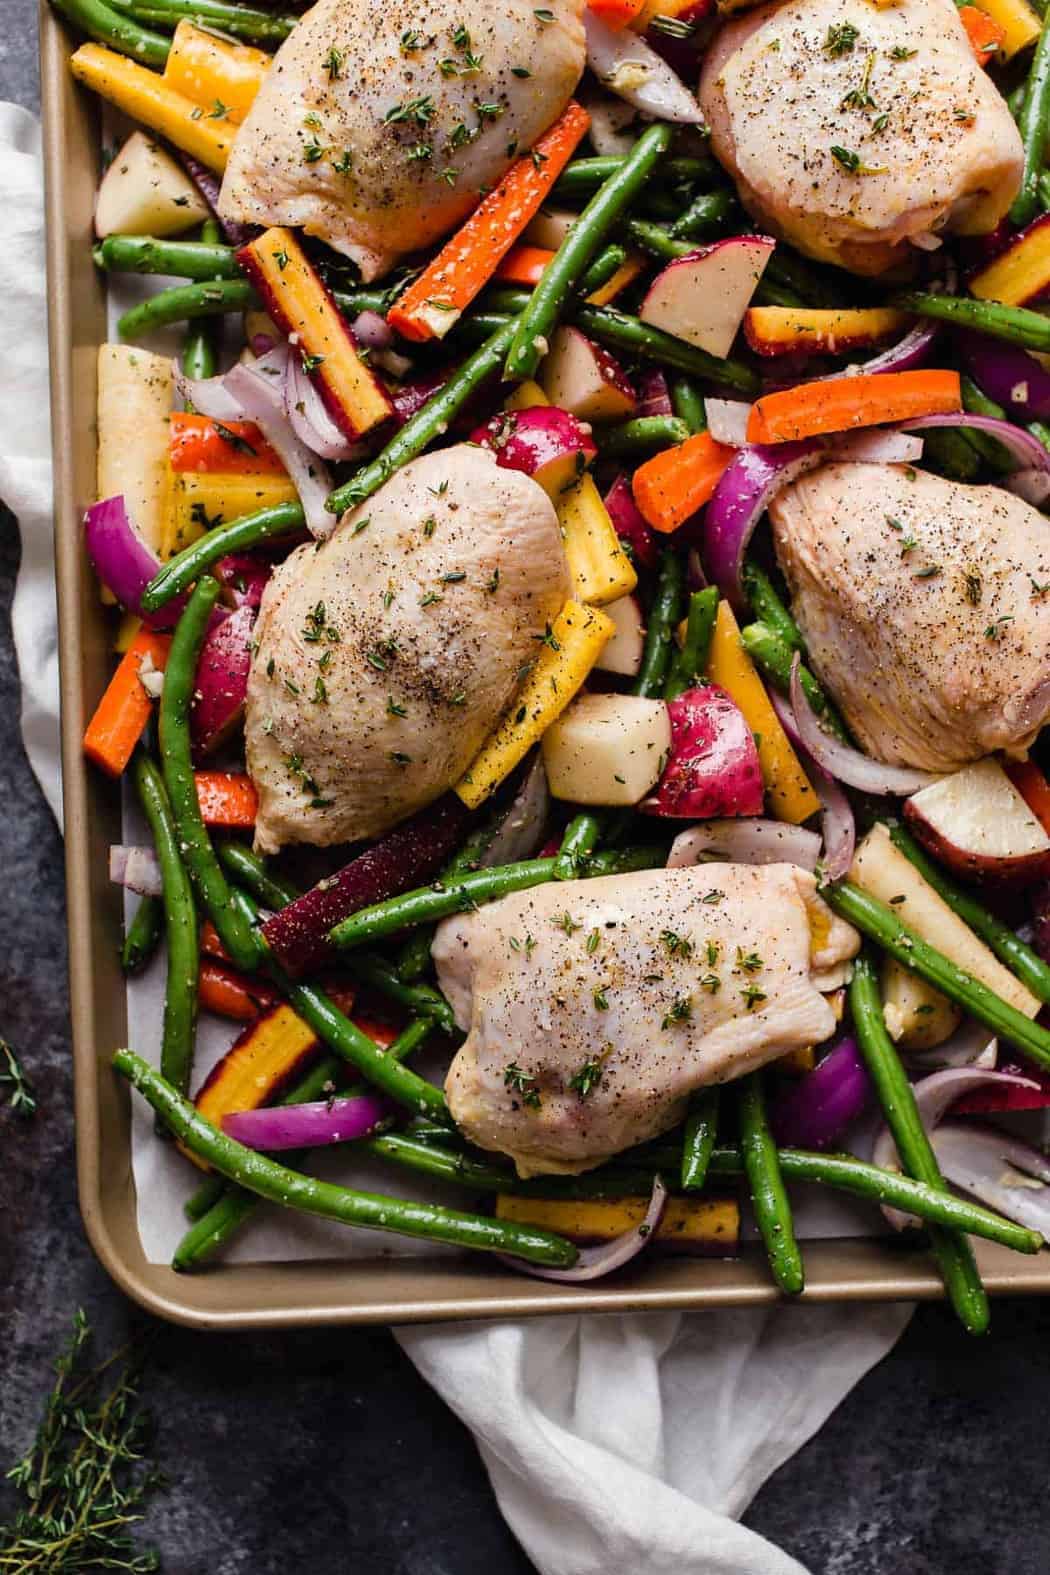 Colorful Roasted Sheet-Pan Vegetables